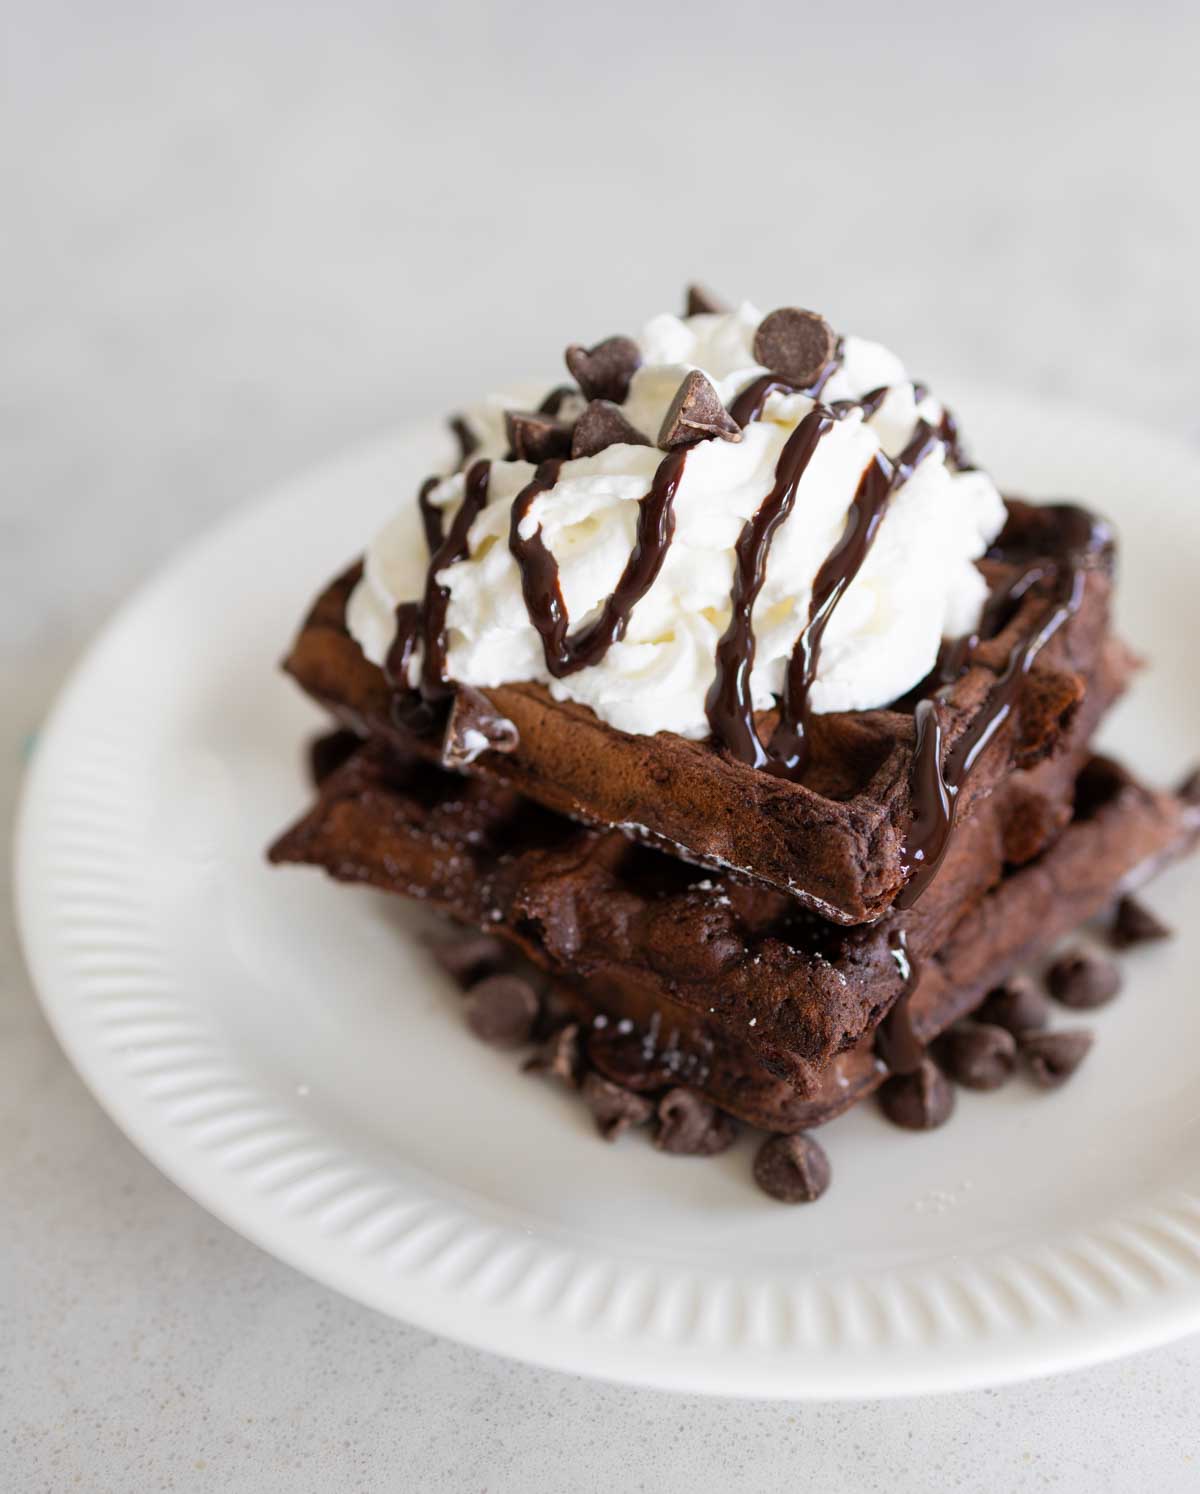 A stack of chocolate waffles with a large dollop of whipped cream, drizzle of chocolate sauce, and sprinkles of chocolate chips on a white plate.